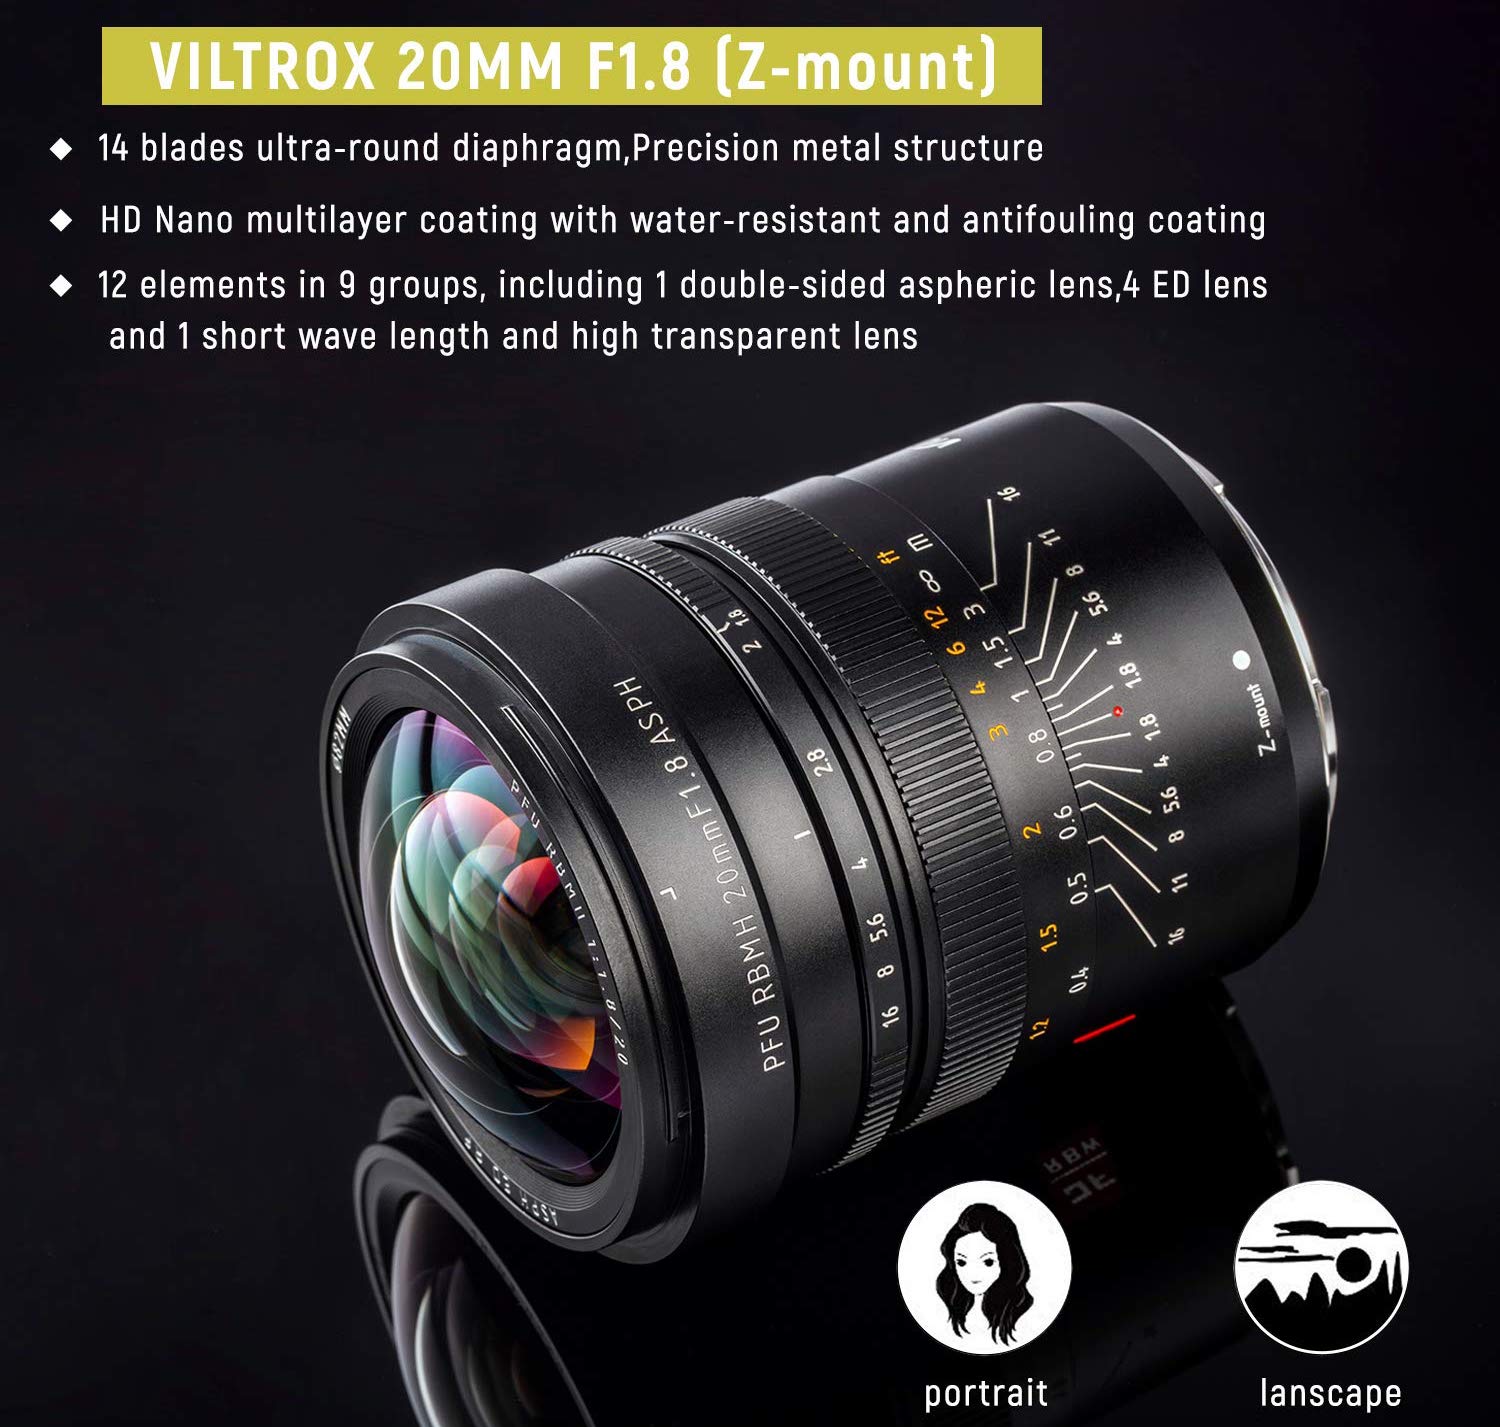 Update: Viltrox does have a 20mm f/1.8 full-frame mirrorless lens 